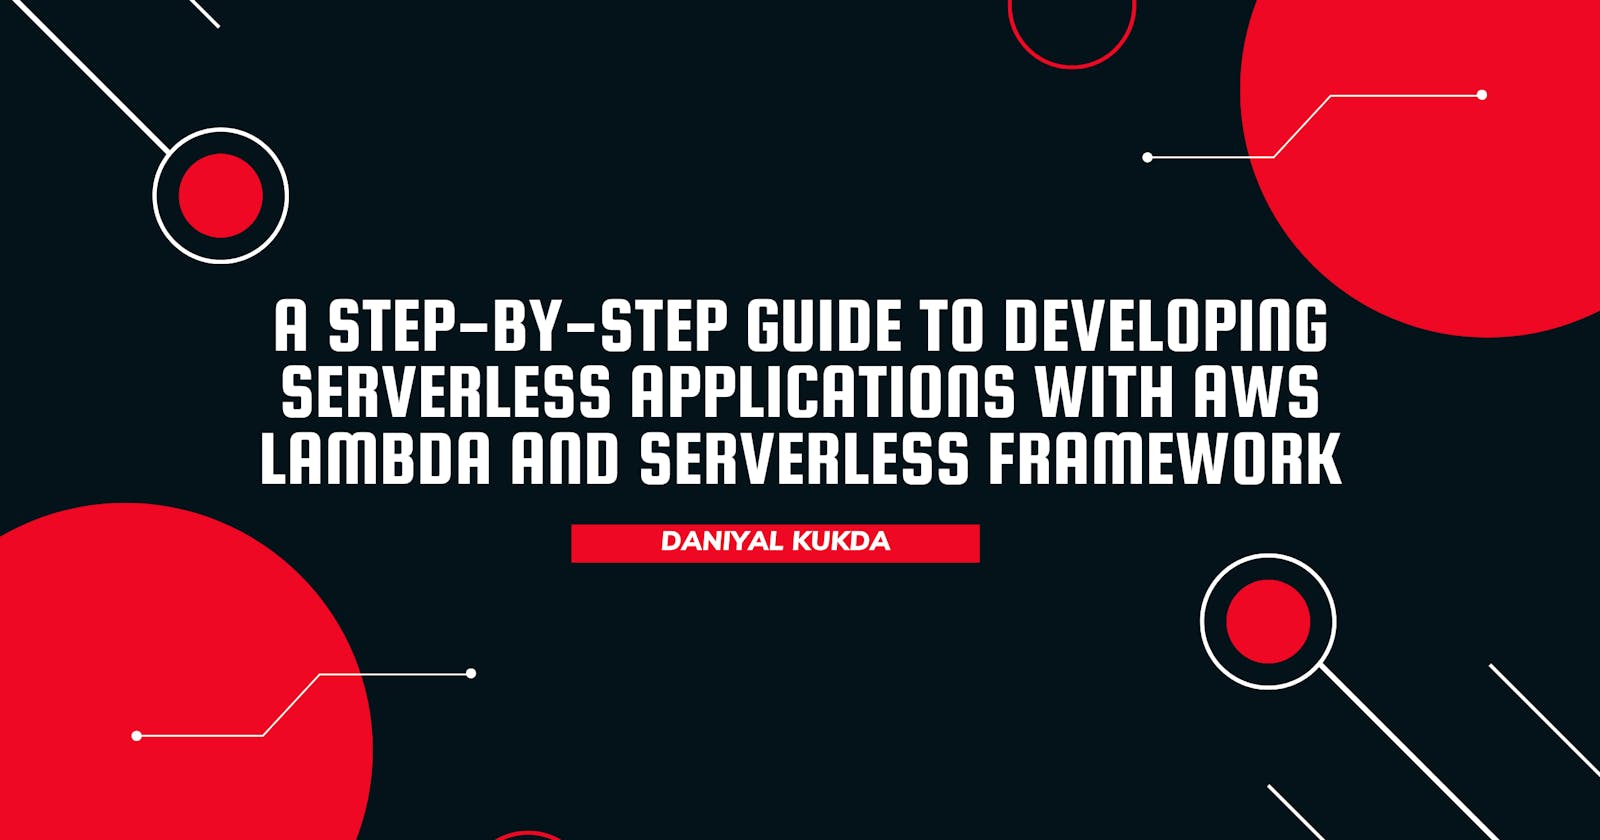 A Step-by-Step Guide to Developing Serverless Applications with AWS Lambda and Serverless Framework